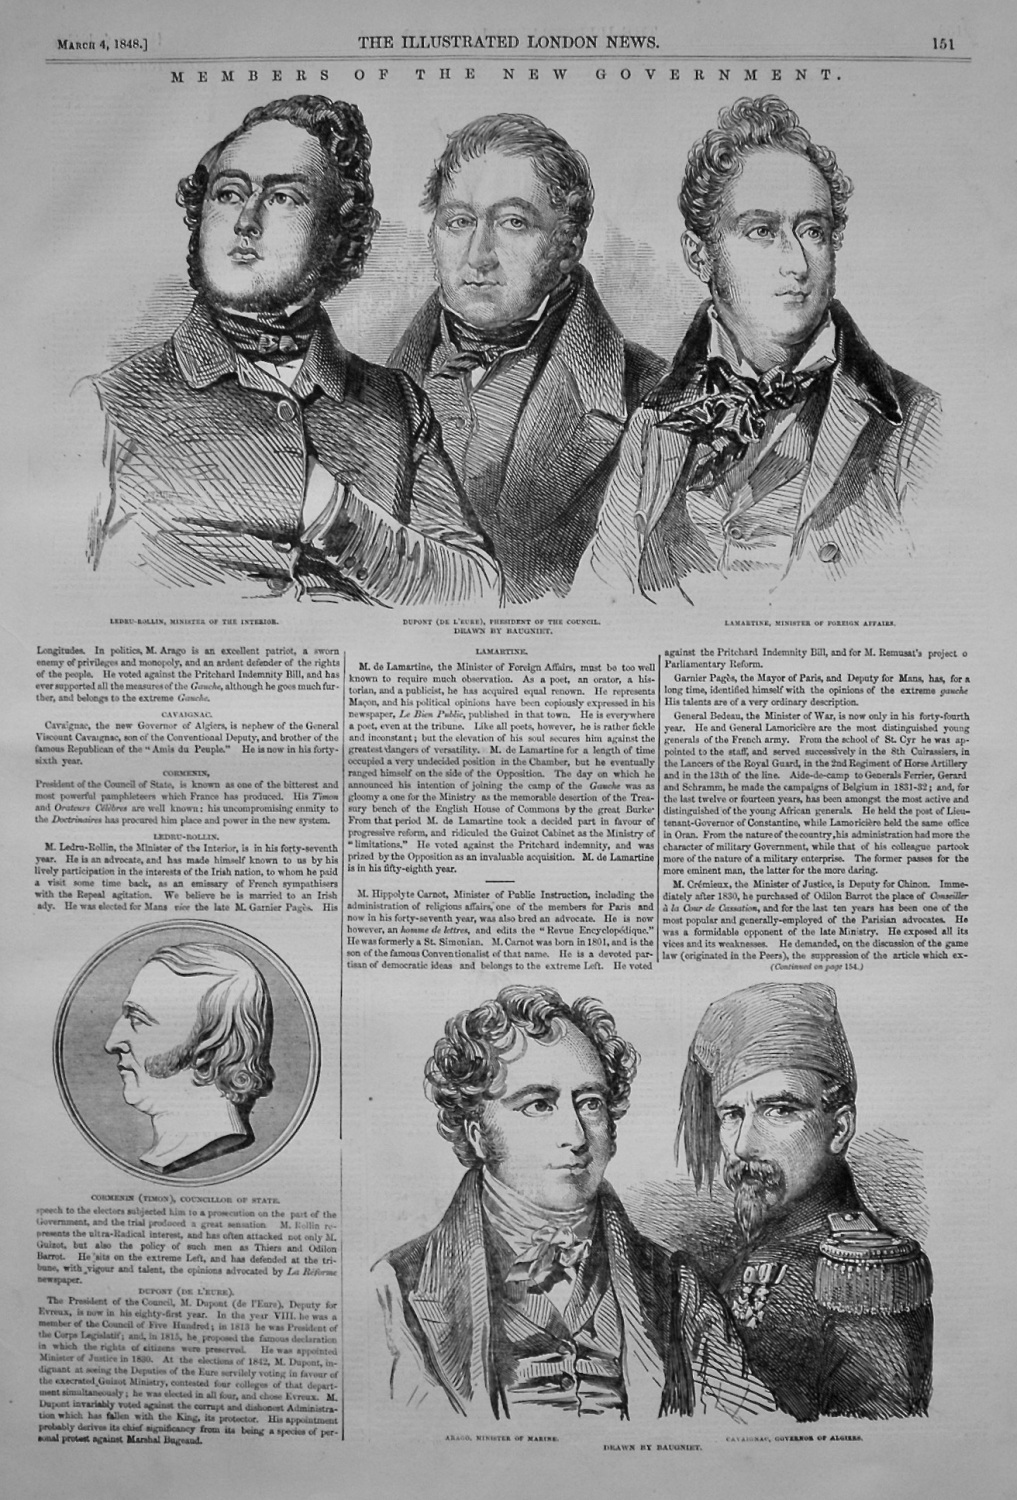 Members of the new Government. (France) 1848